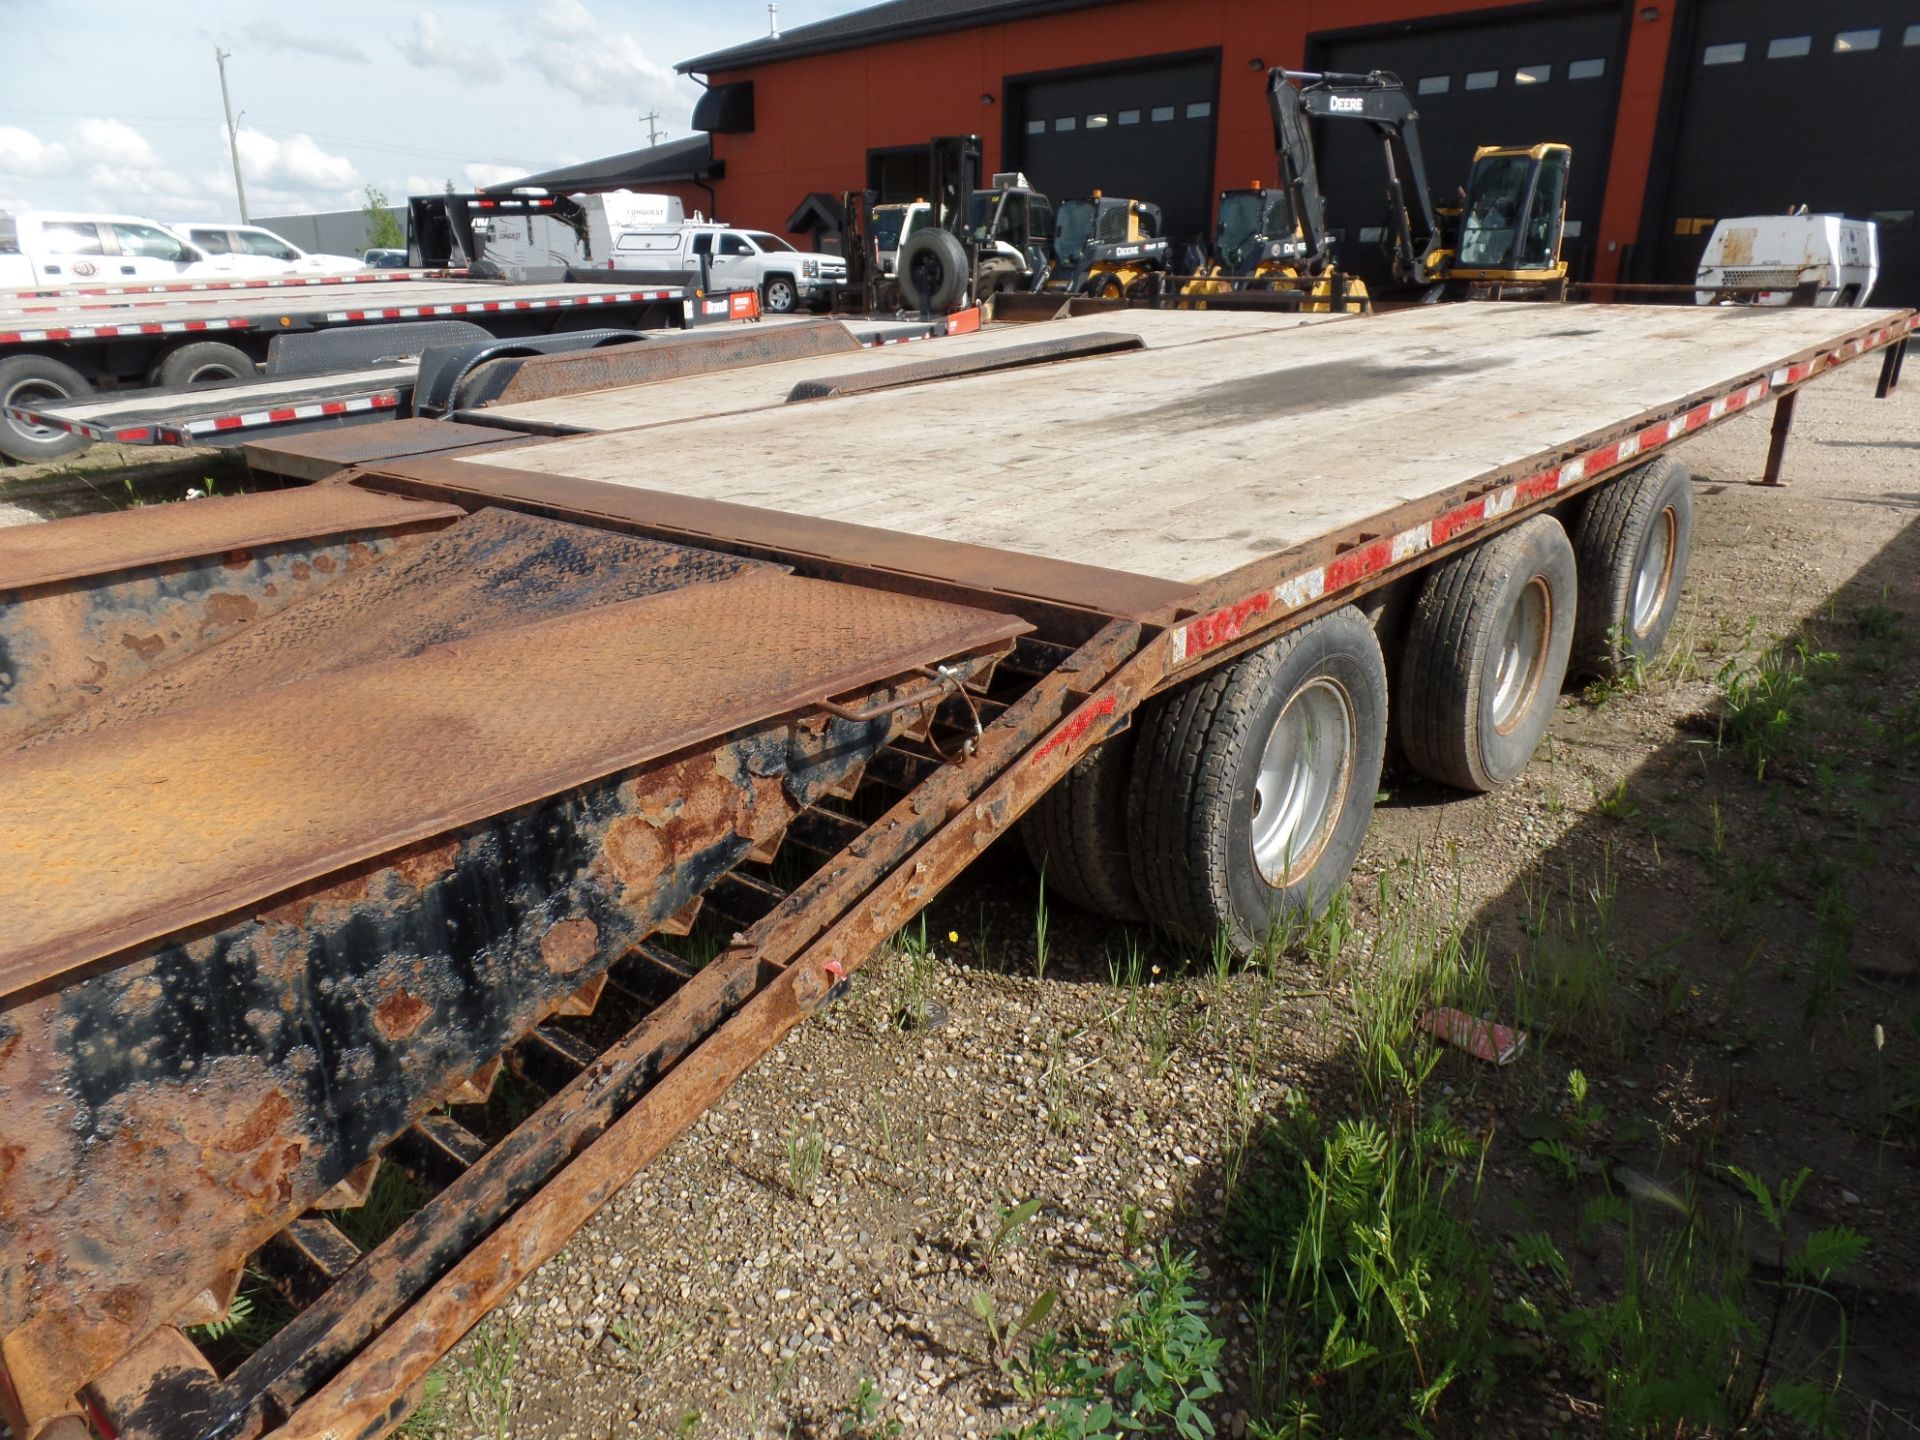 2013 SWS 24' TANDEM TRI AXLE EQUIPMENT TRAILER, BEAVERTAIL W/FOLD OVER RAMPS, S/N 4UGFP3033ED024685 - Image 6 of 8